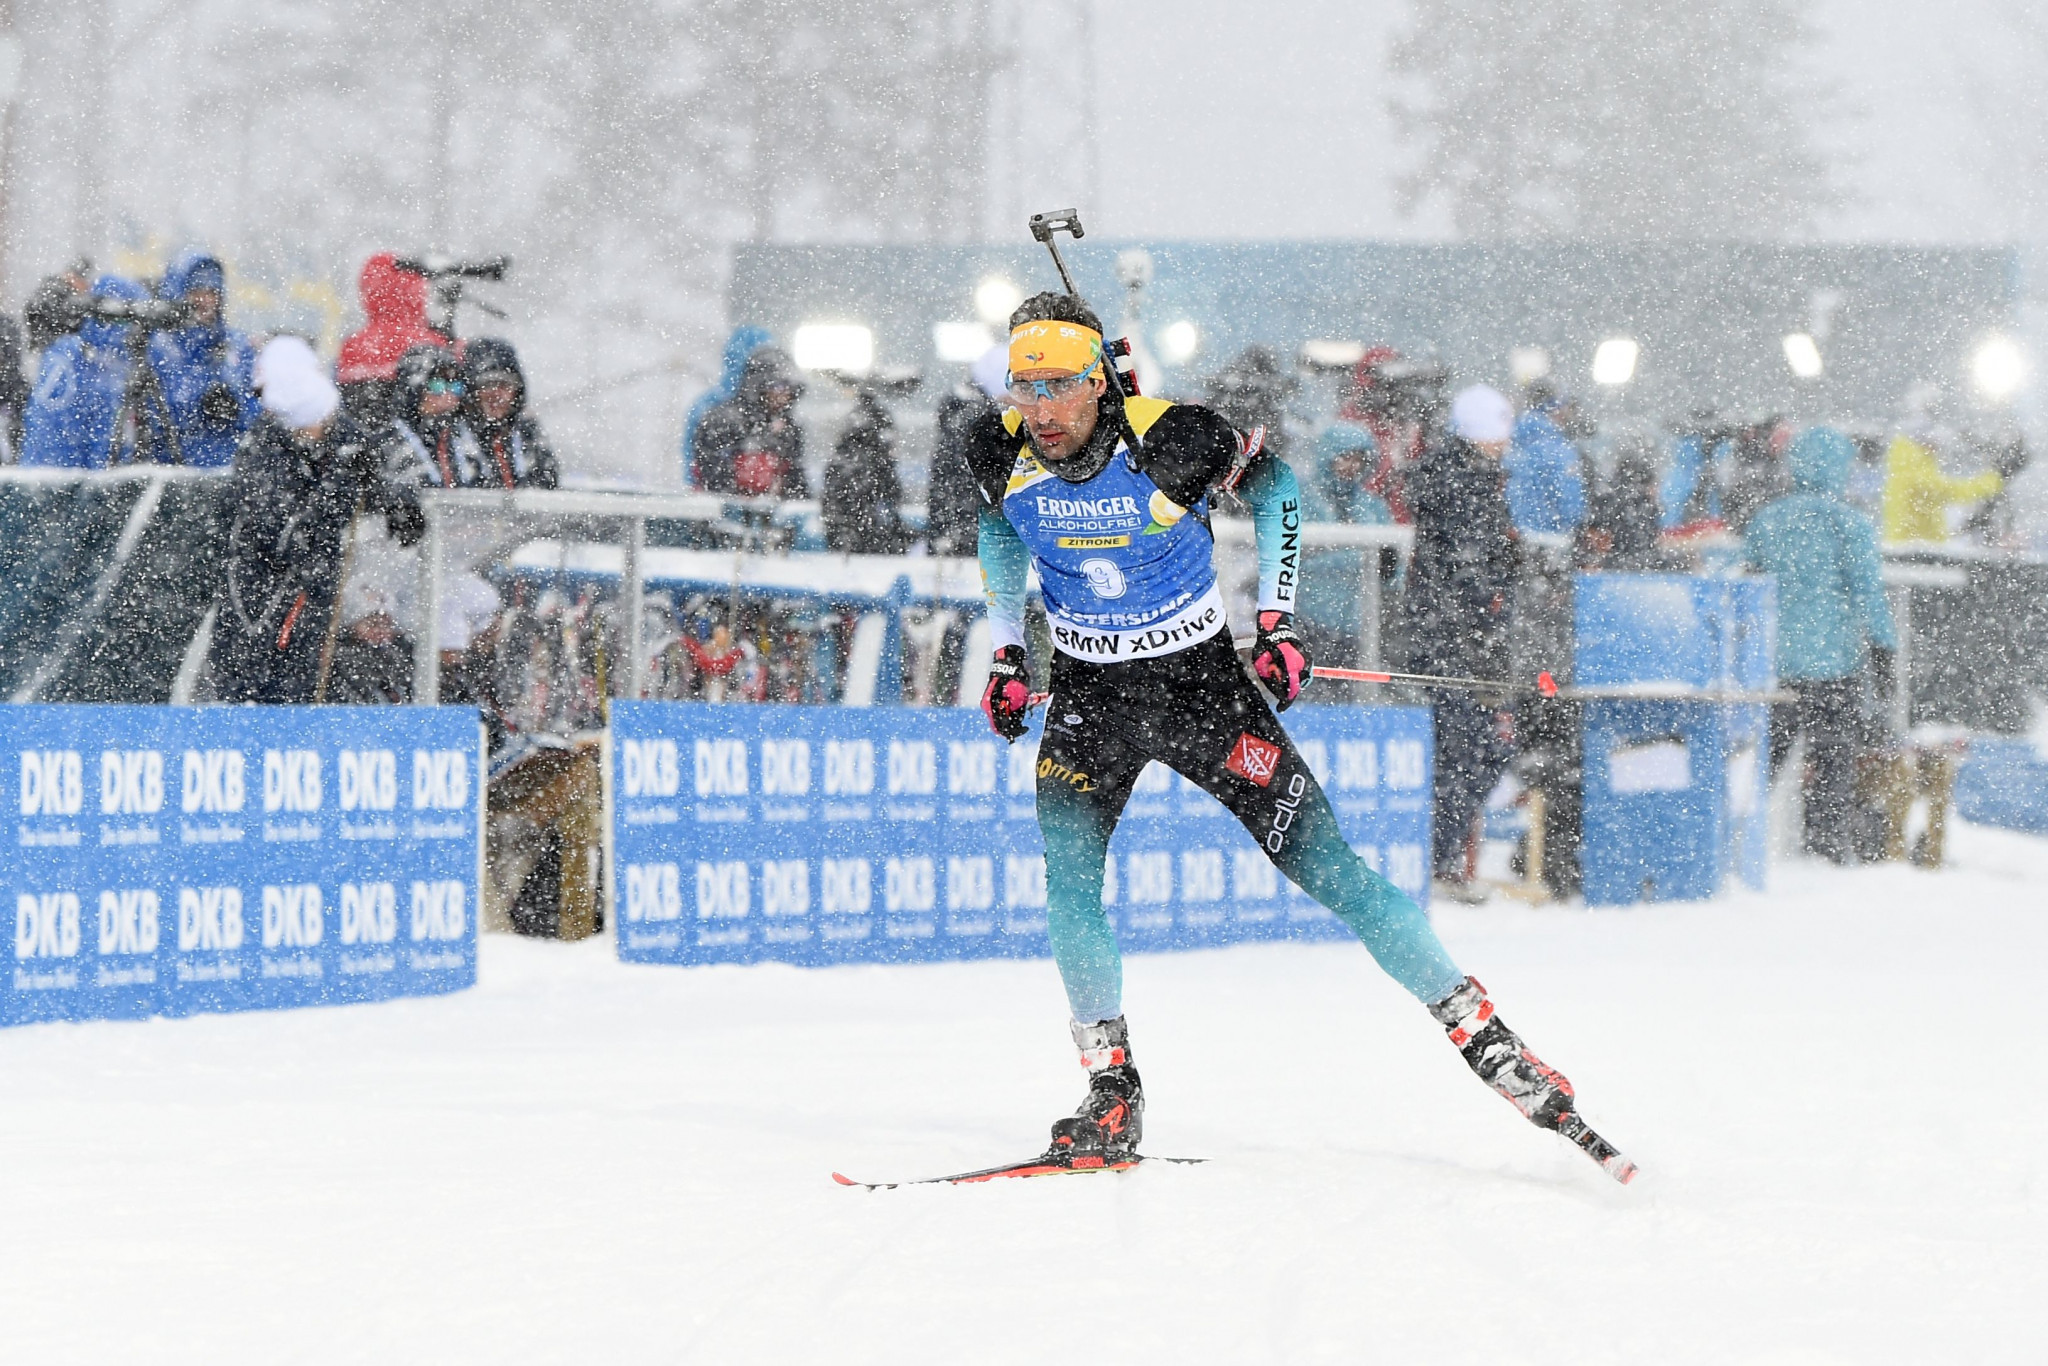 The event is being organised by French biathlon legend Martin Fourcade ©Getty Images